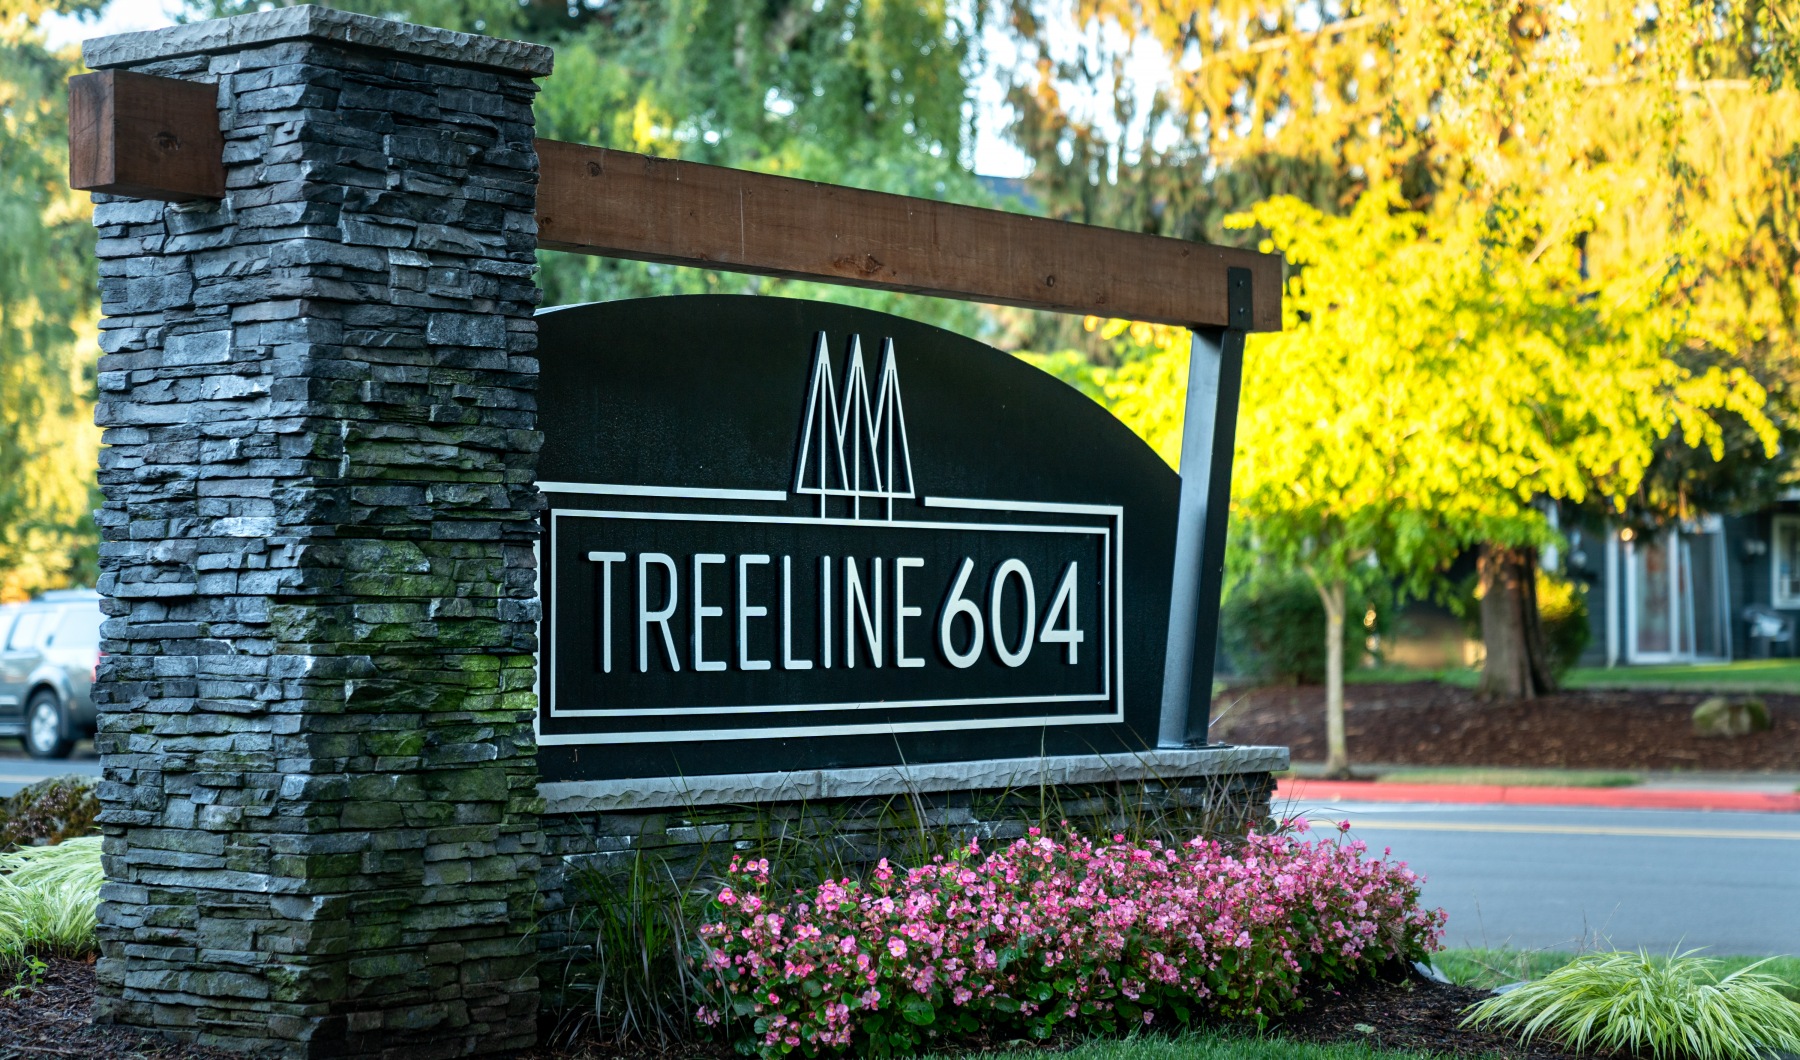 Treeline 604 is a pet-friendly apartment community in Vancouver, WA